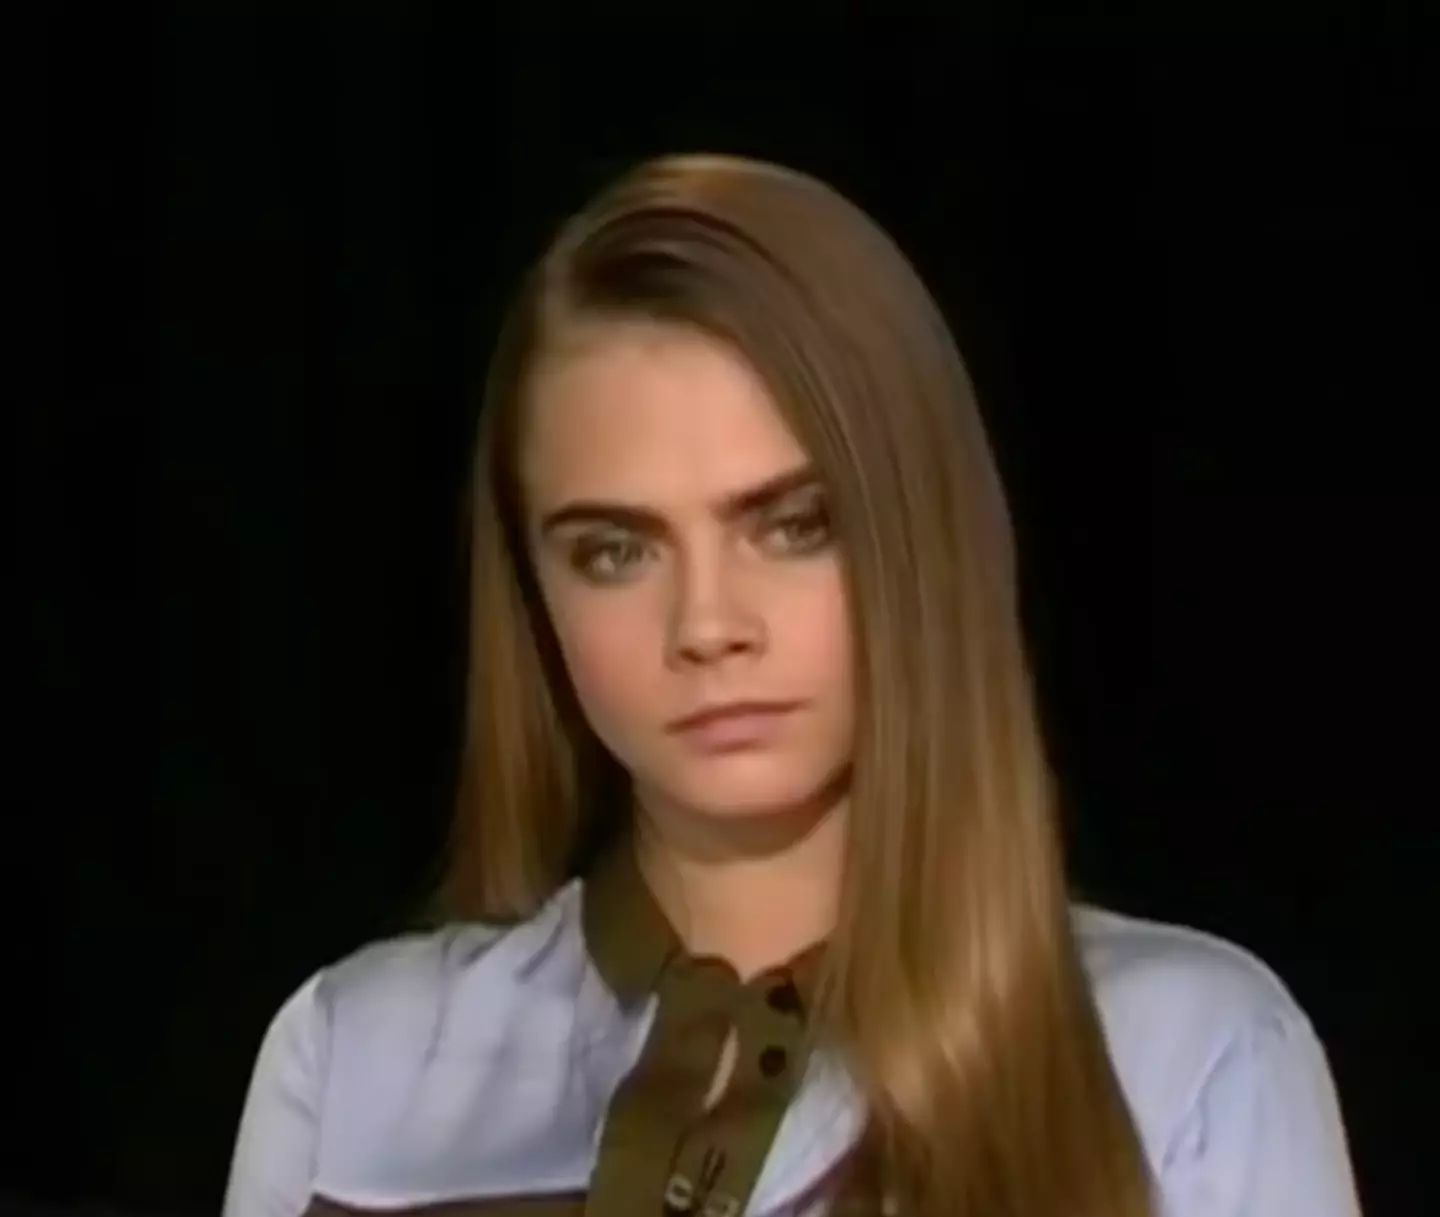 Things got off to a rocky start when the interviewer got Cara's name wrong.